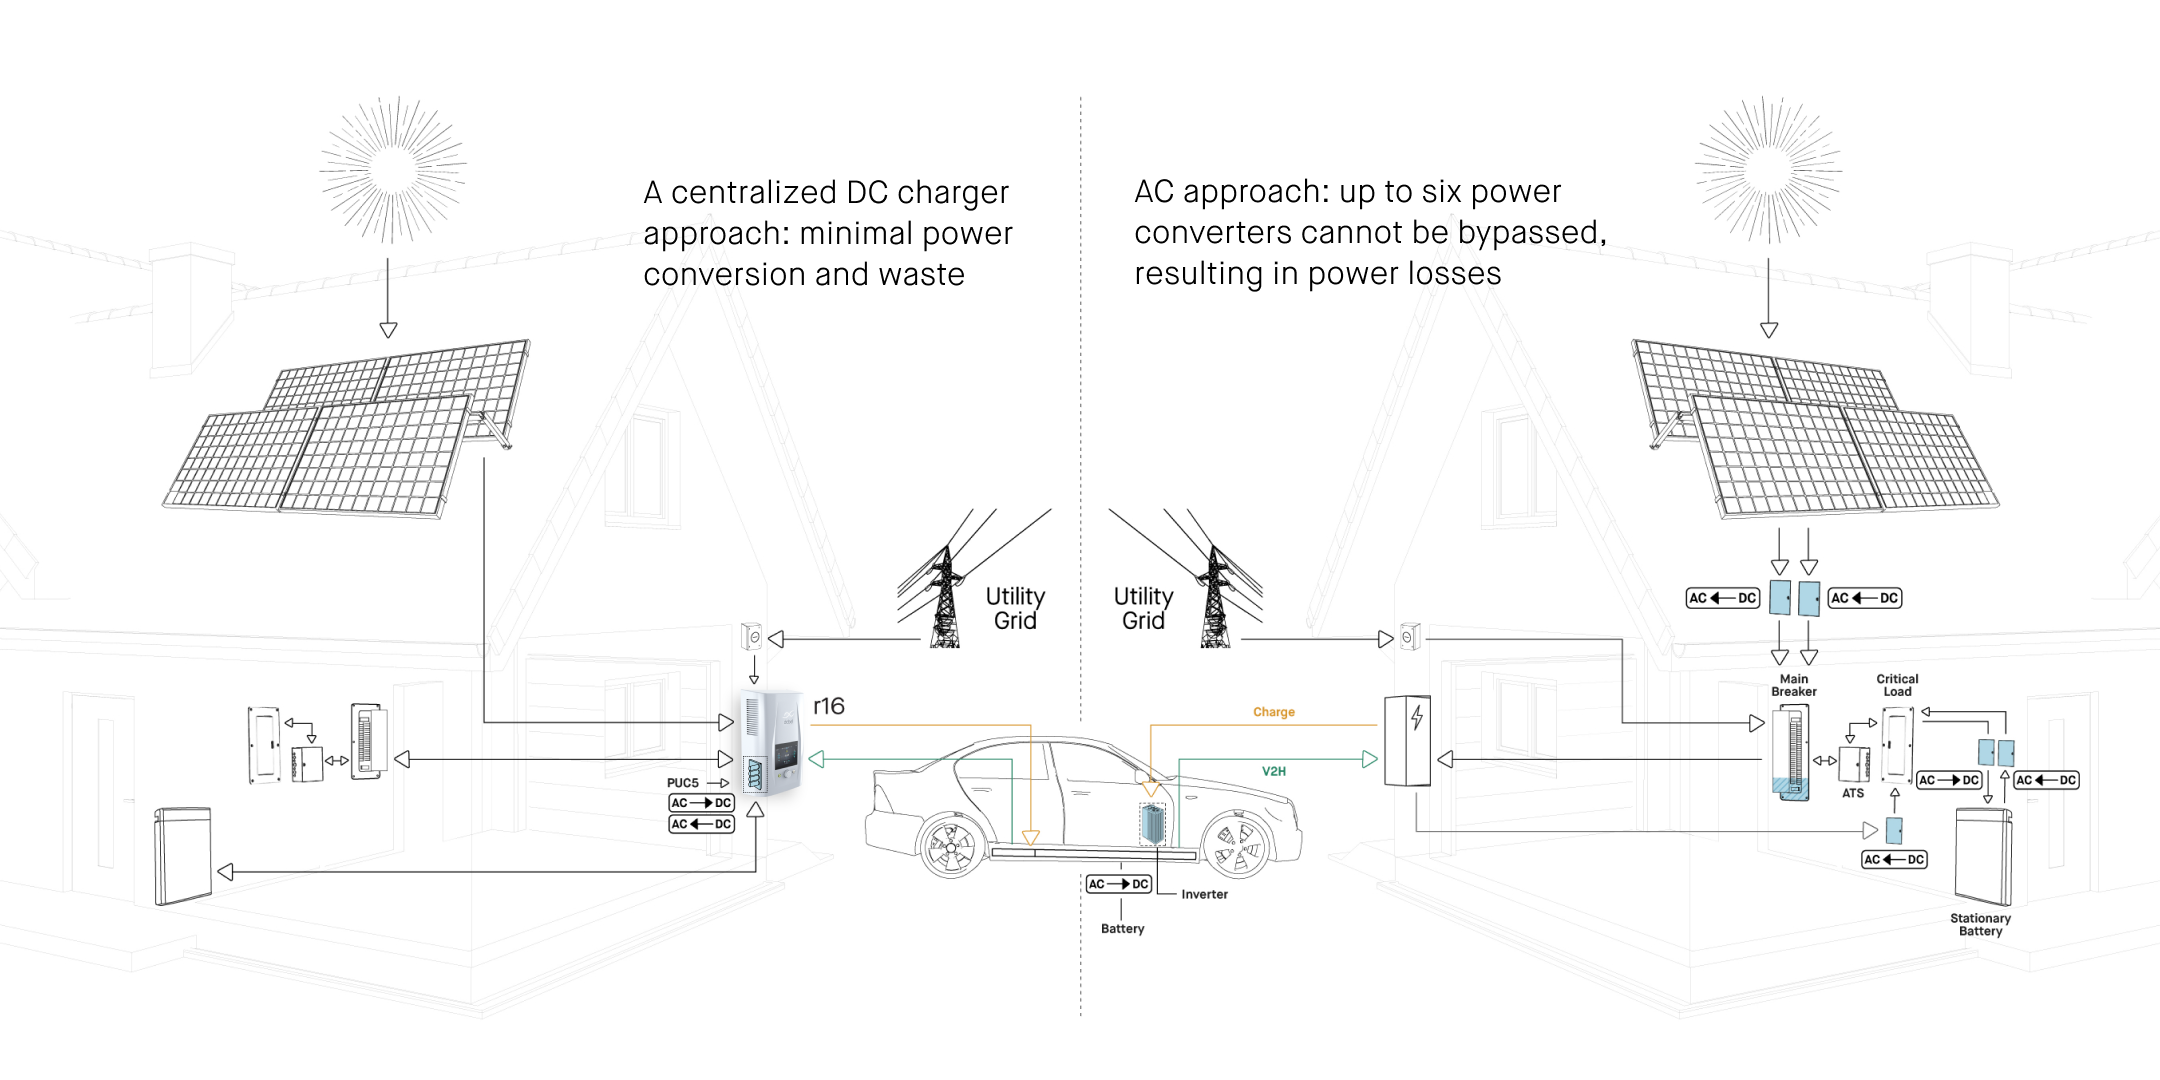 DC charger vs AC charger for the home